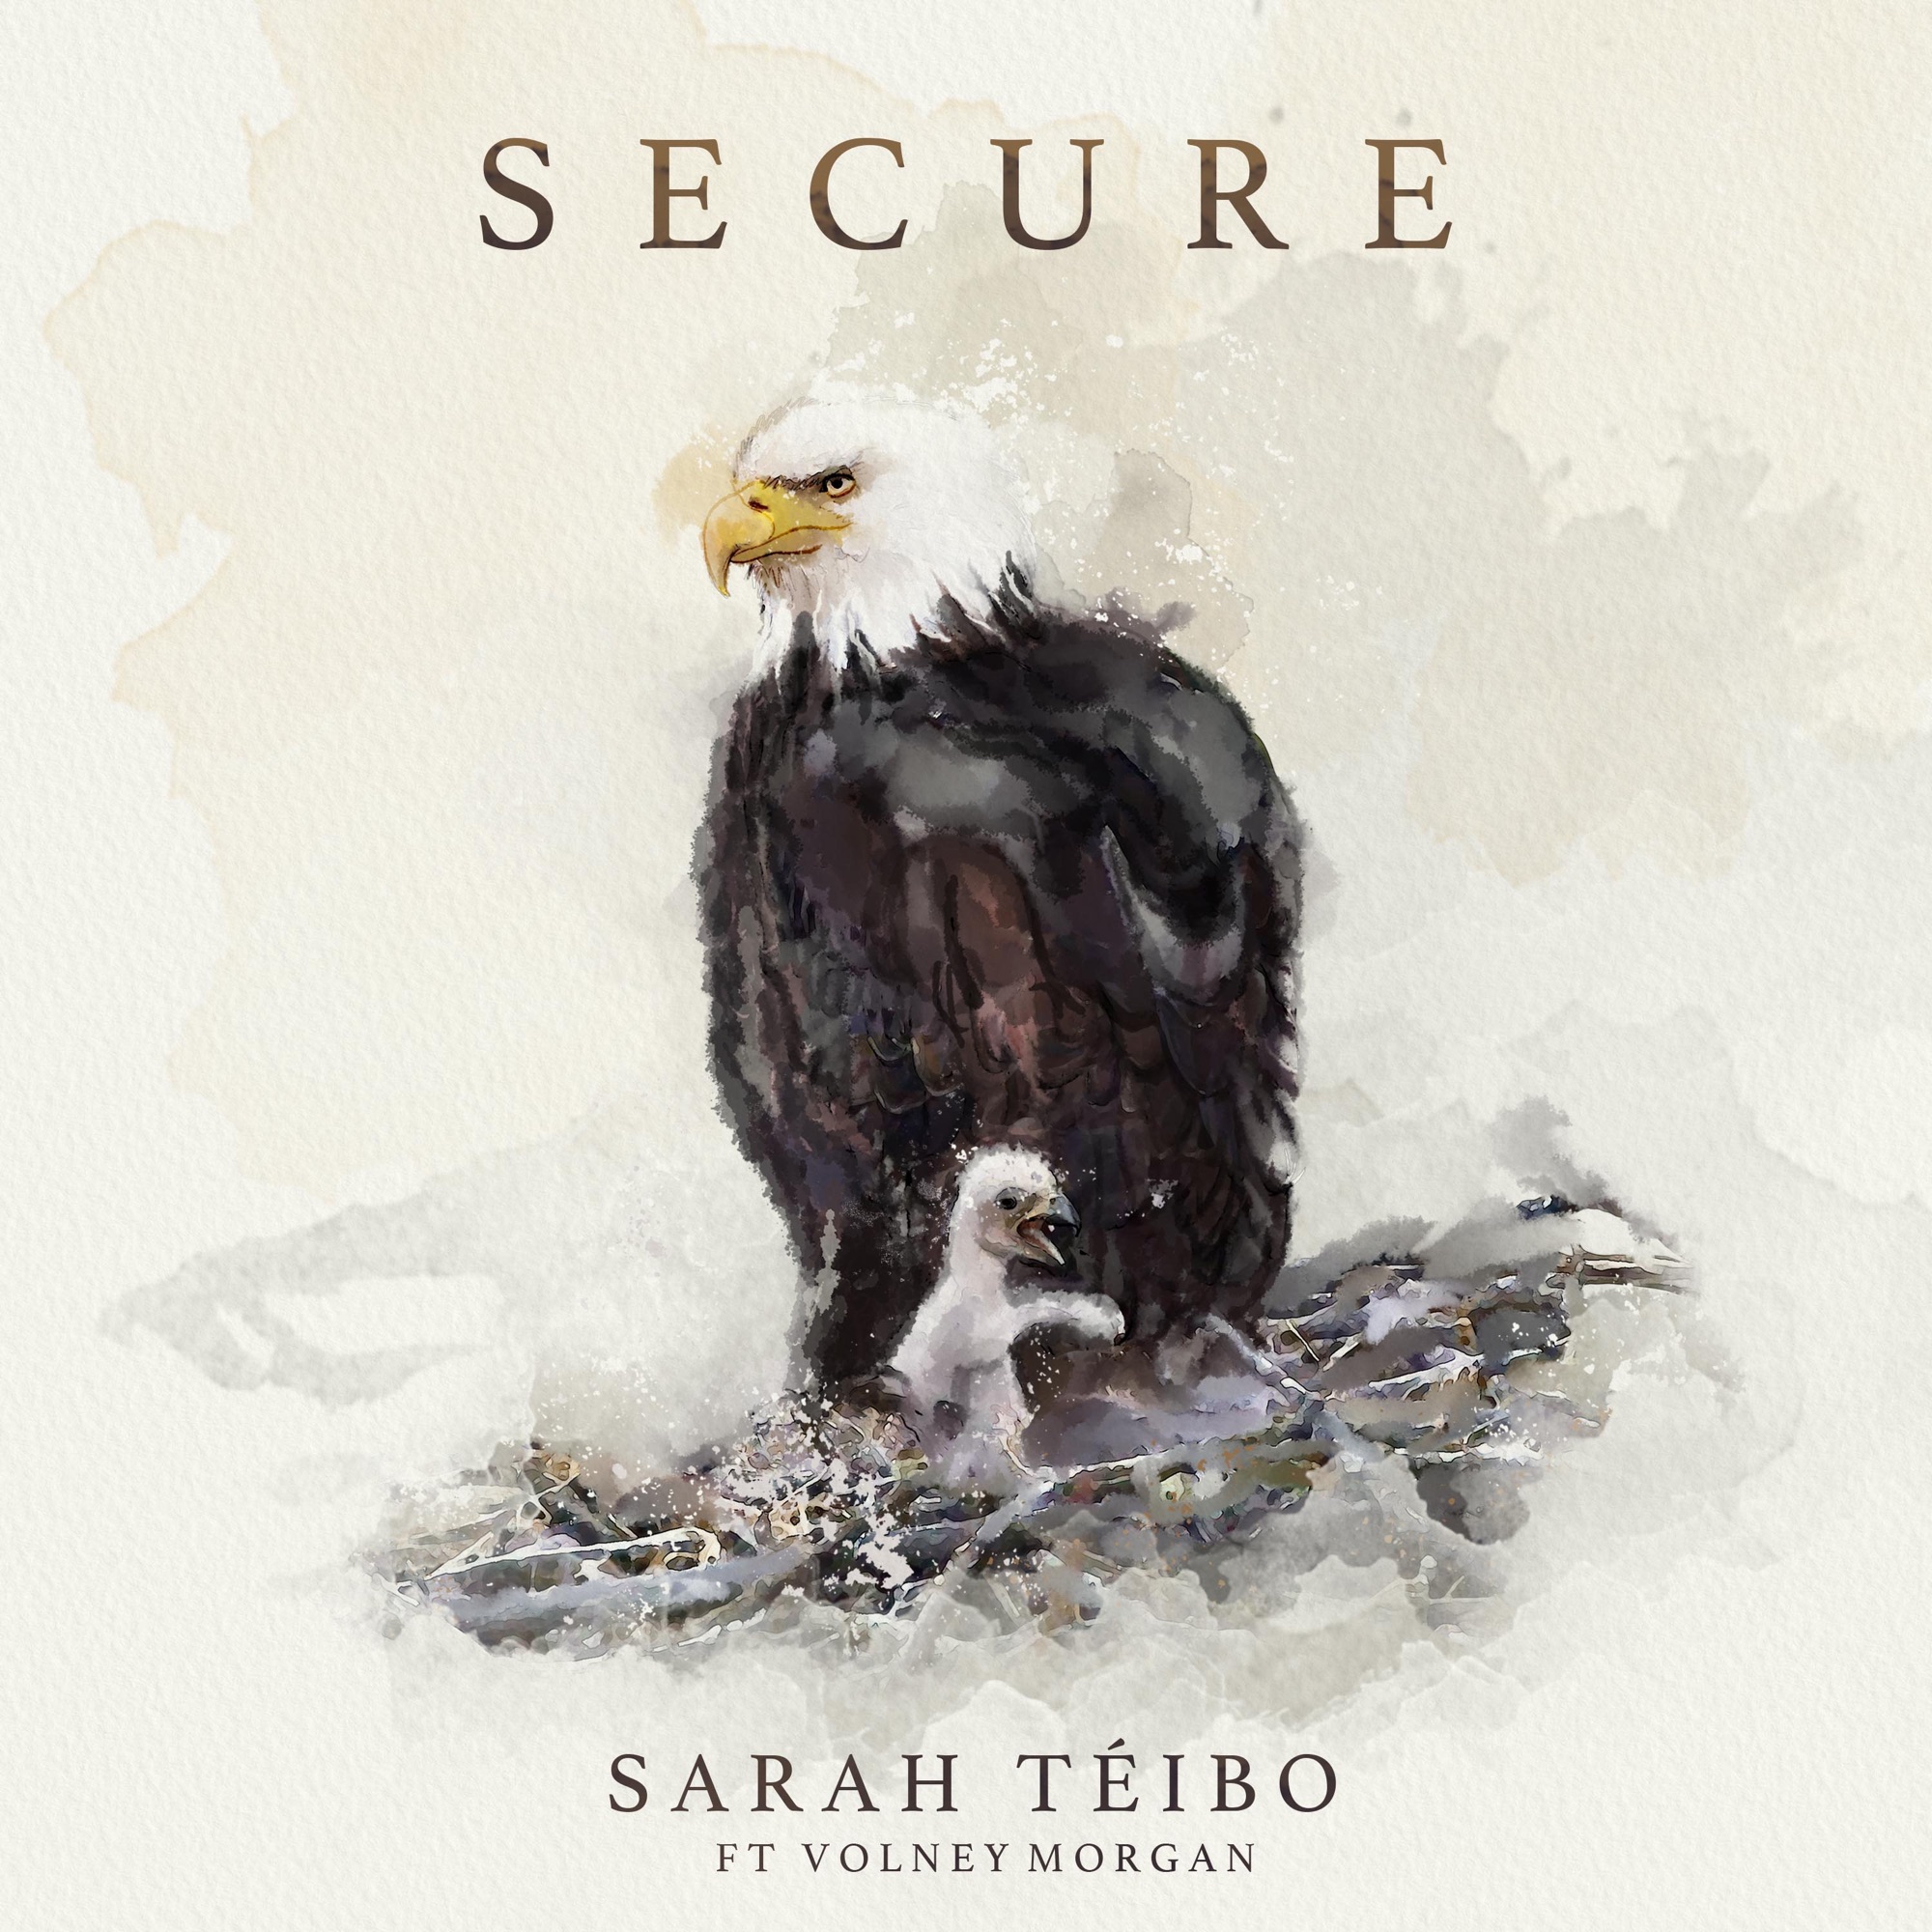 Art for Secure (feat. Volney Morgan) by Sarah Téibo